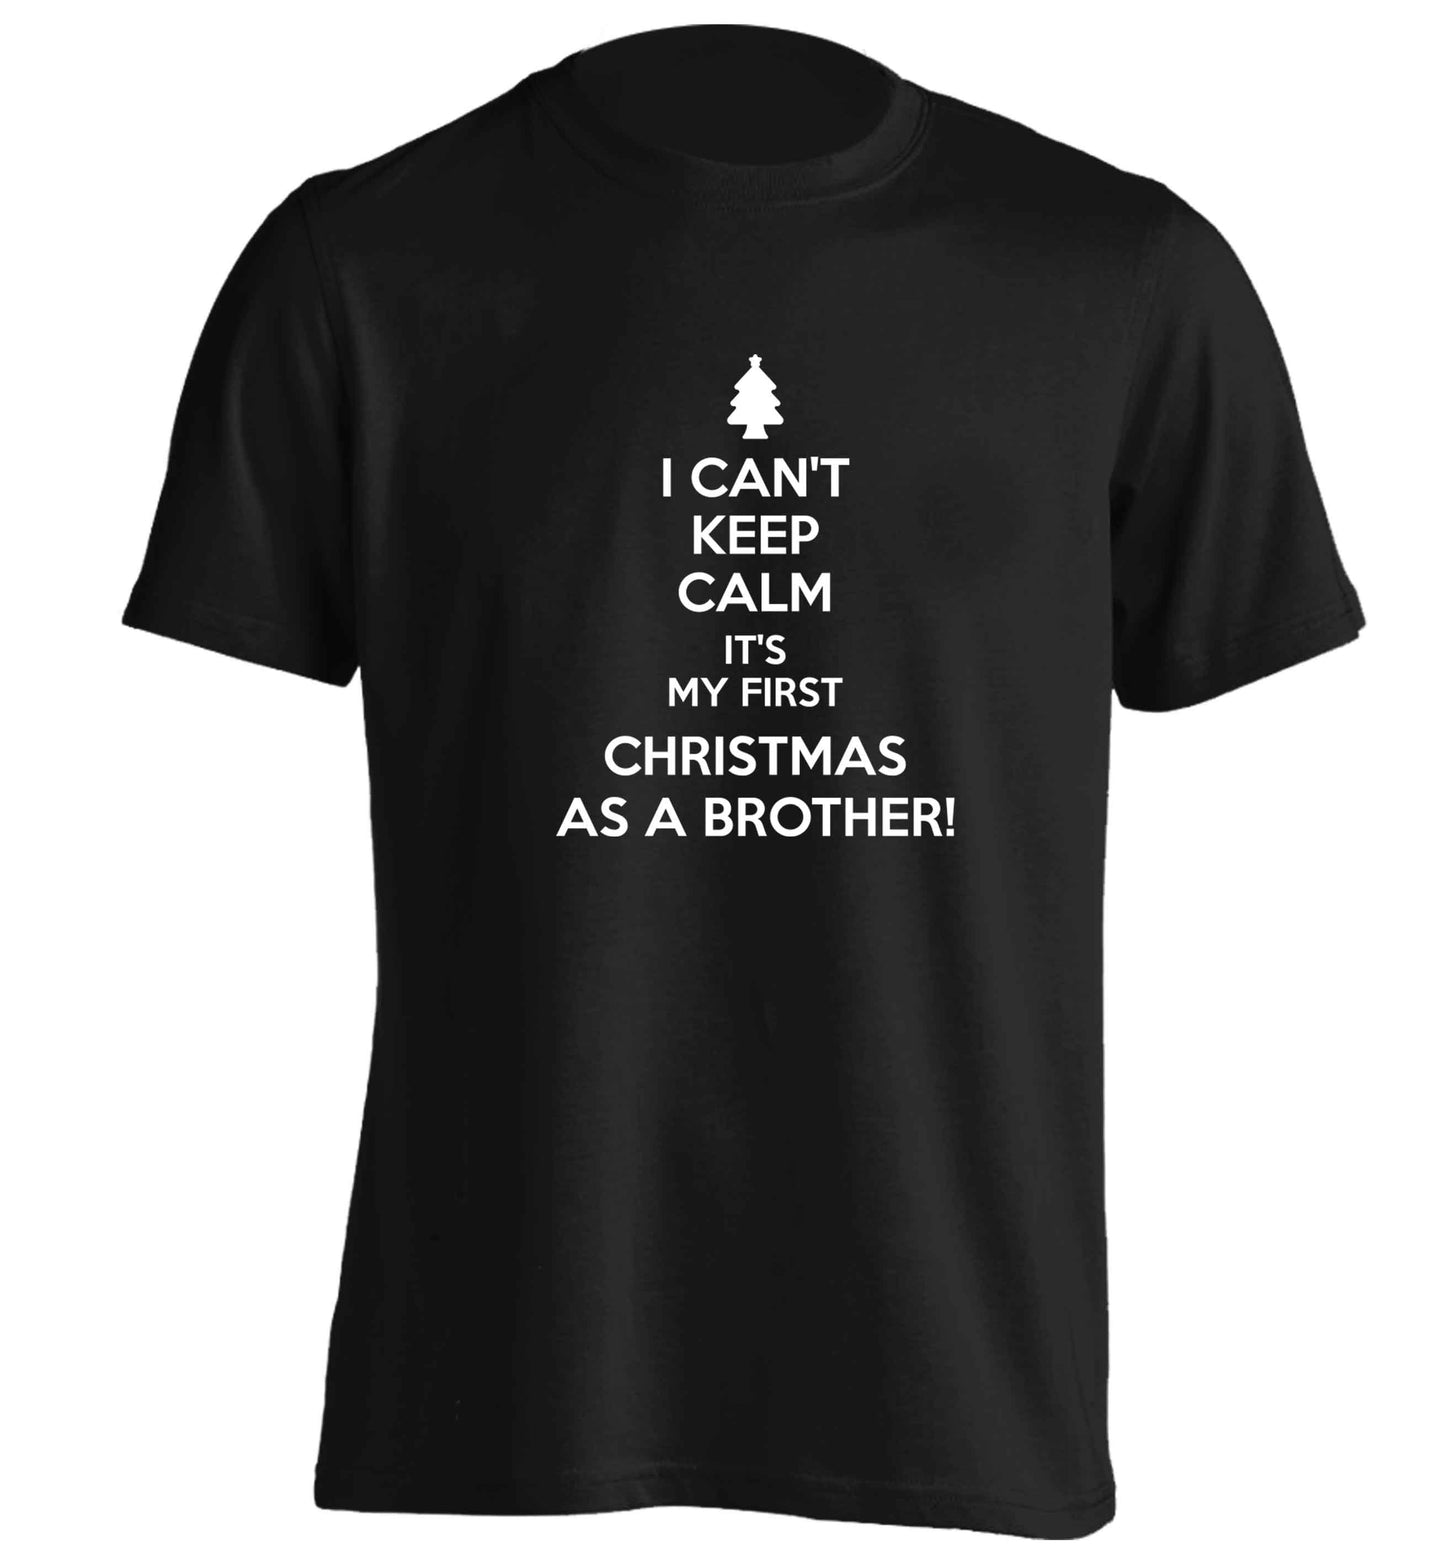 I can't keep calm it's my first Christmas as a brother! adults unisex black Tshirt 2XL